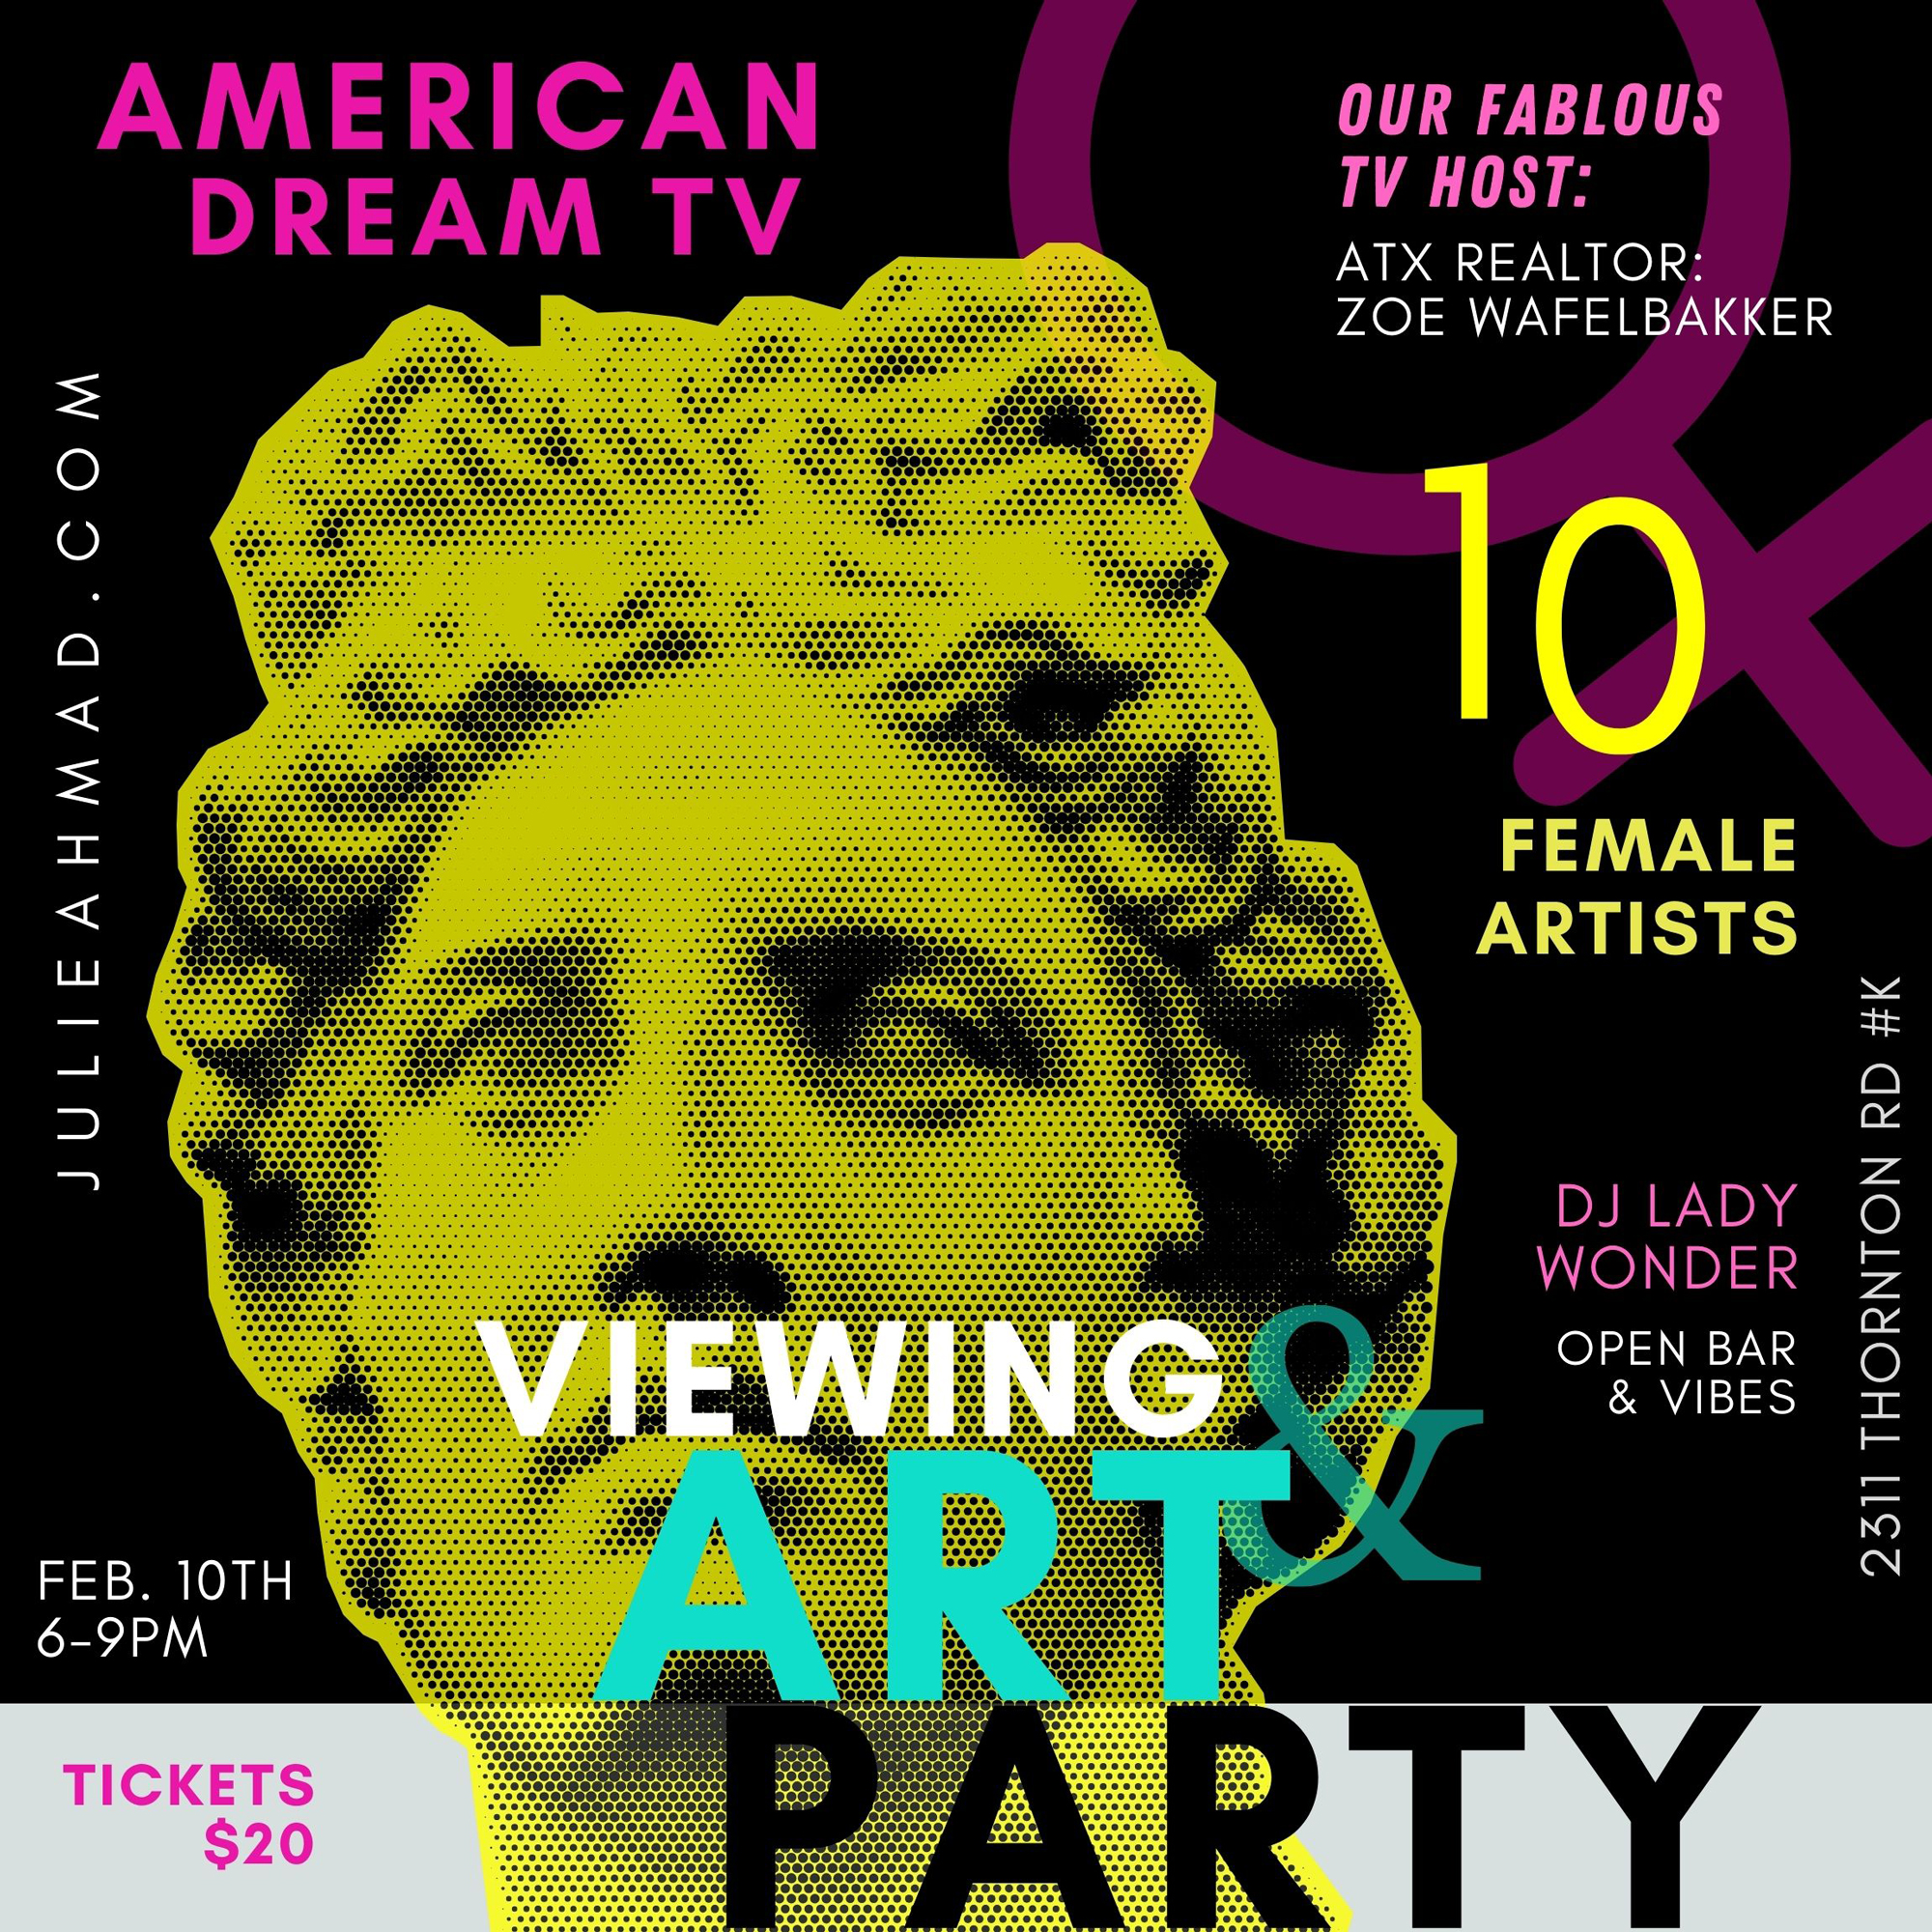 The American Dream TV Viewing + Art Party